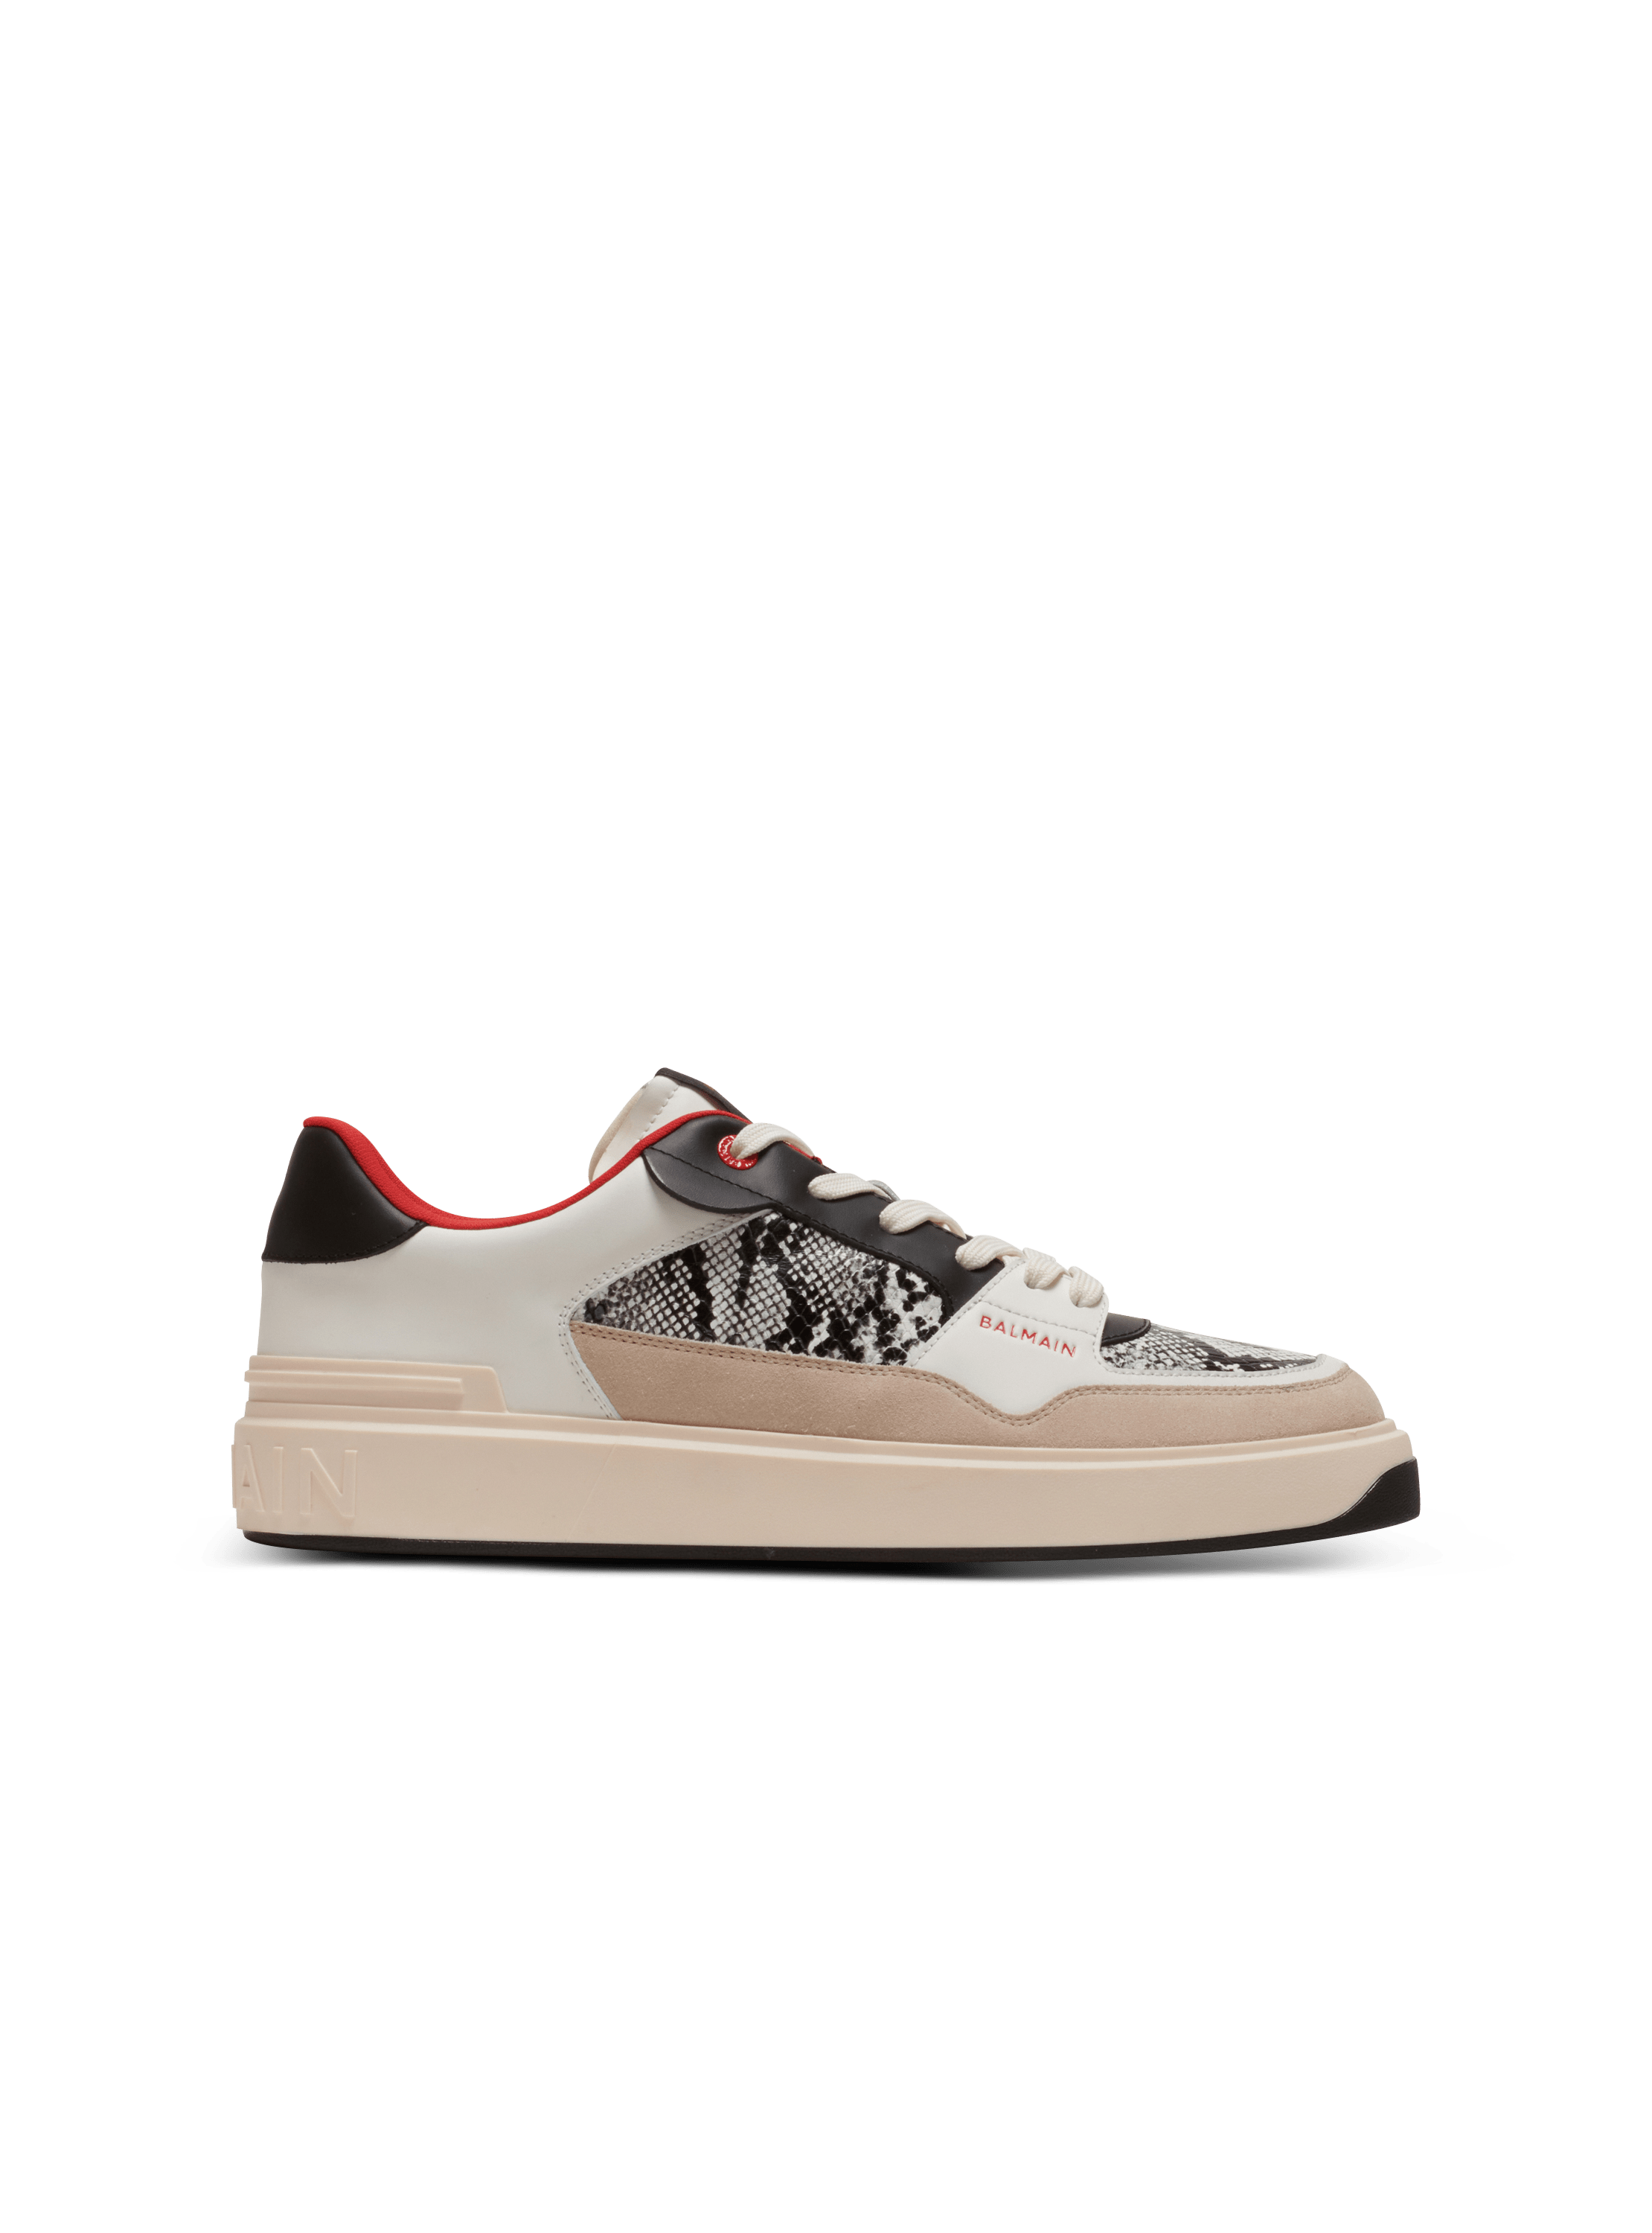 B-Court Flip snakeskin-effect leather and suede trainers, multicolor, hi-res